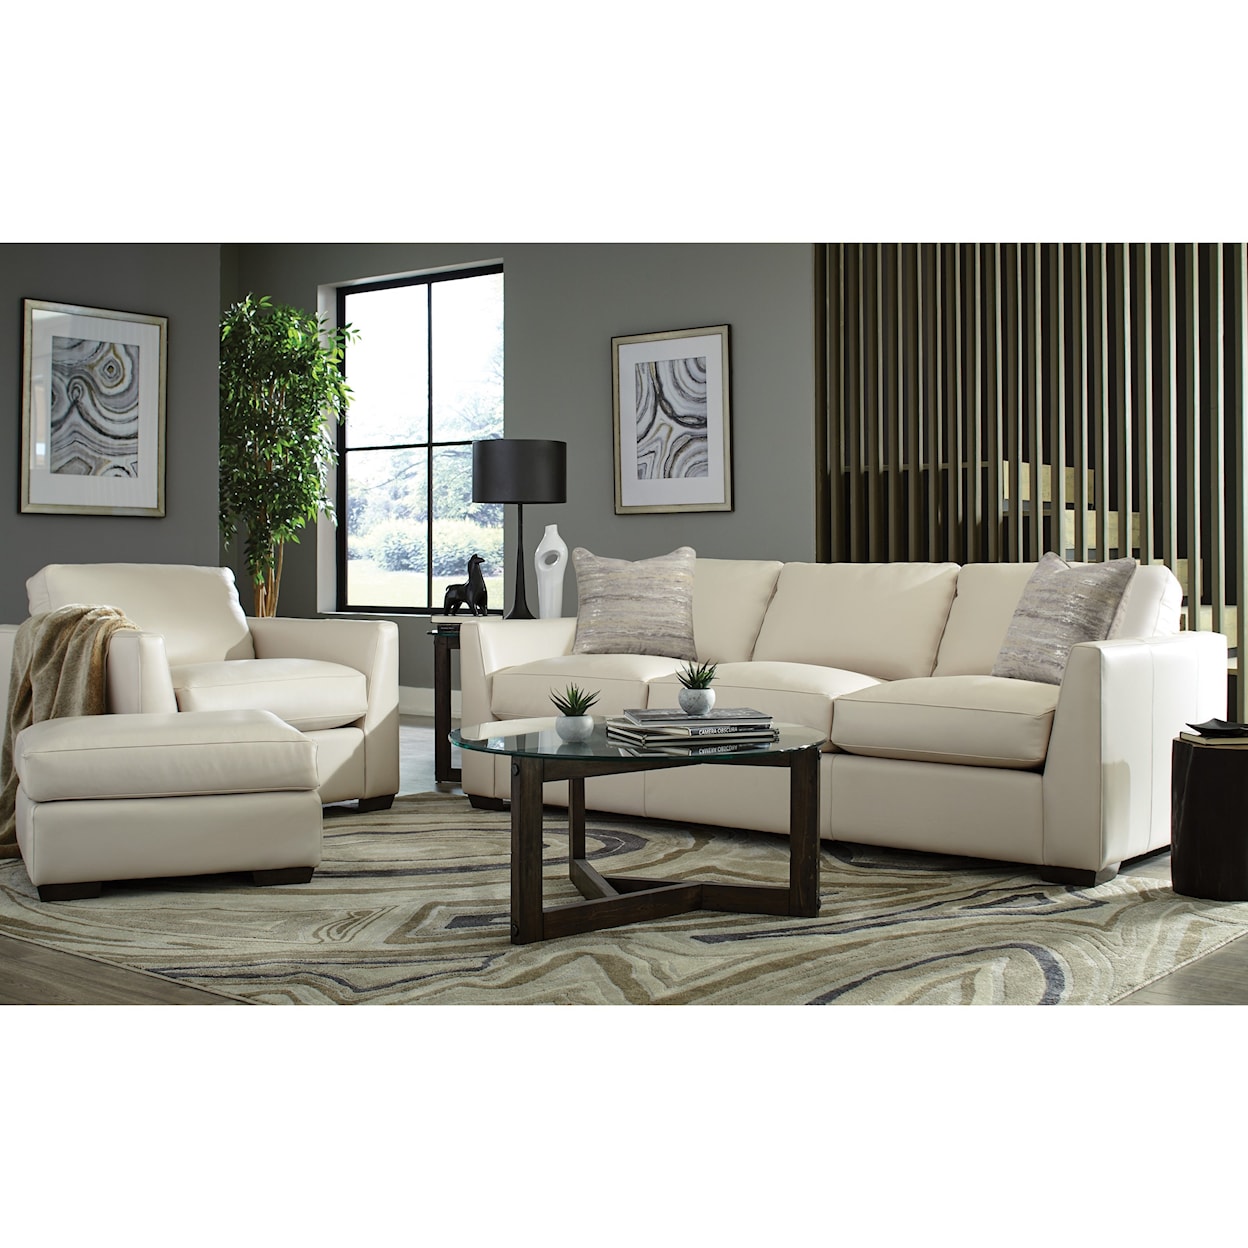 Craftmaster L783950 Living Room Group